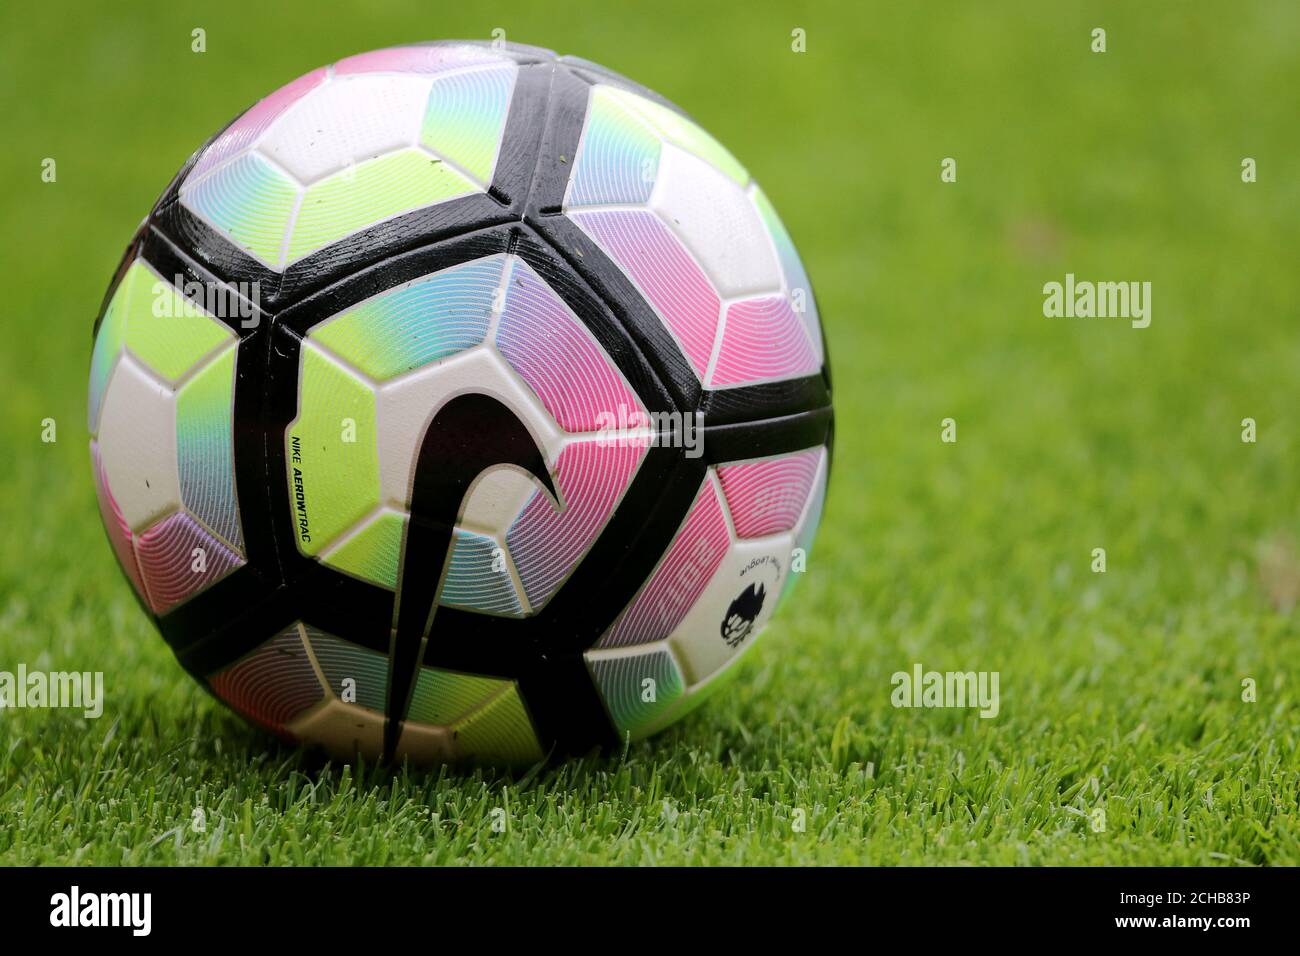 A general view of a 2017 Nike Ordem 4 Premier League Match Football Stock  Photo - Alamy